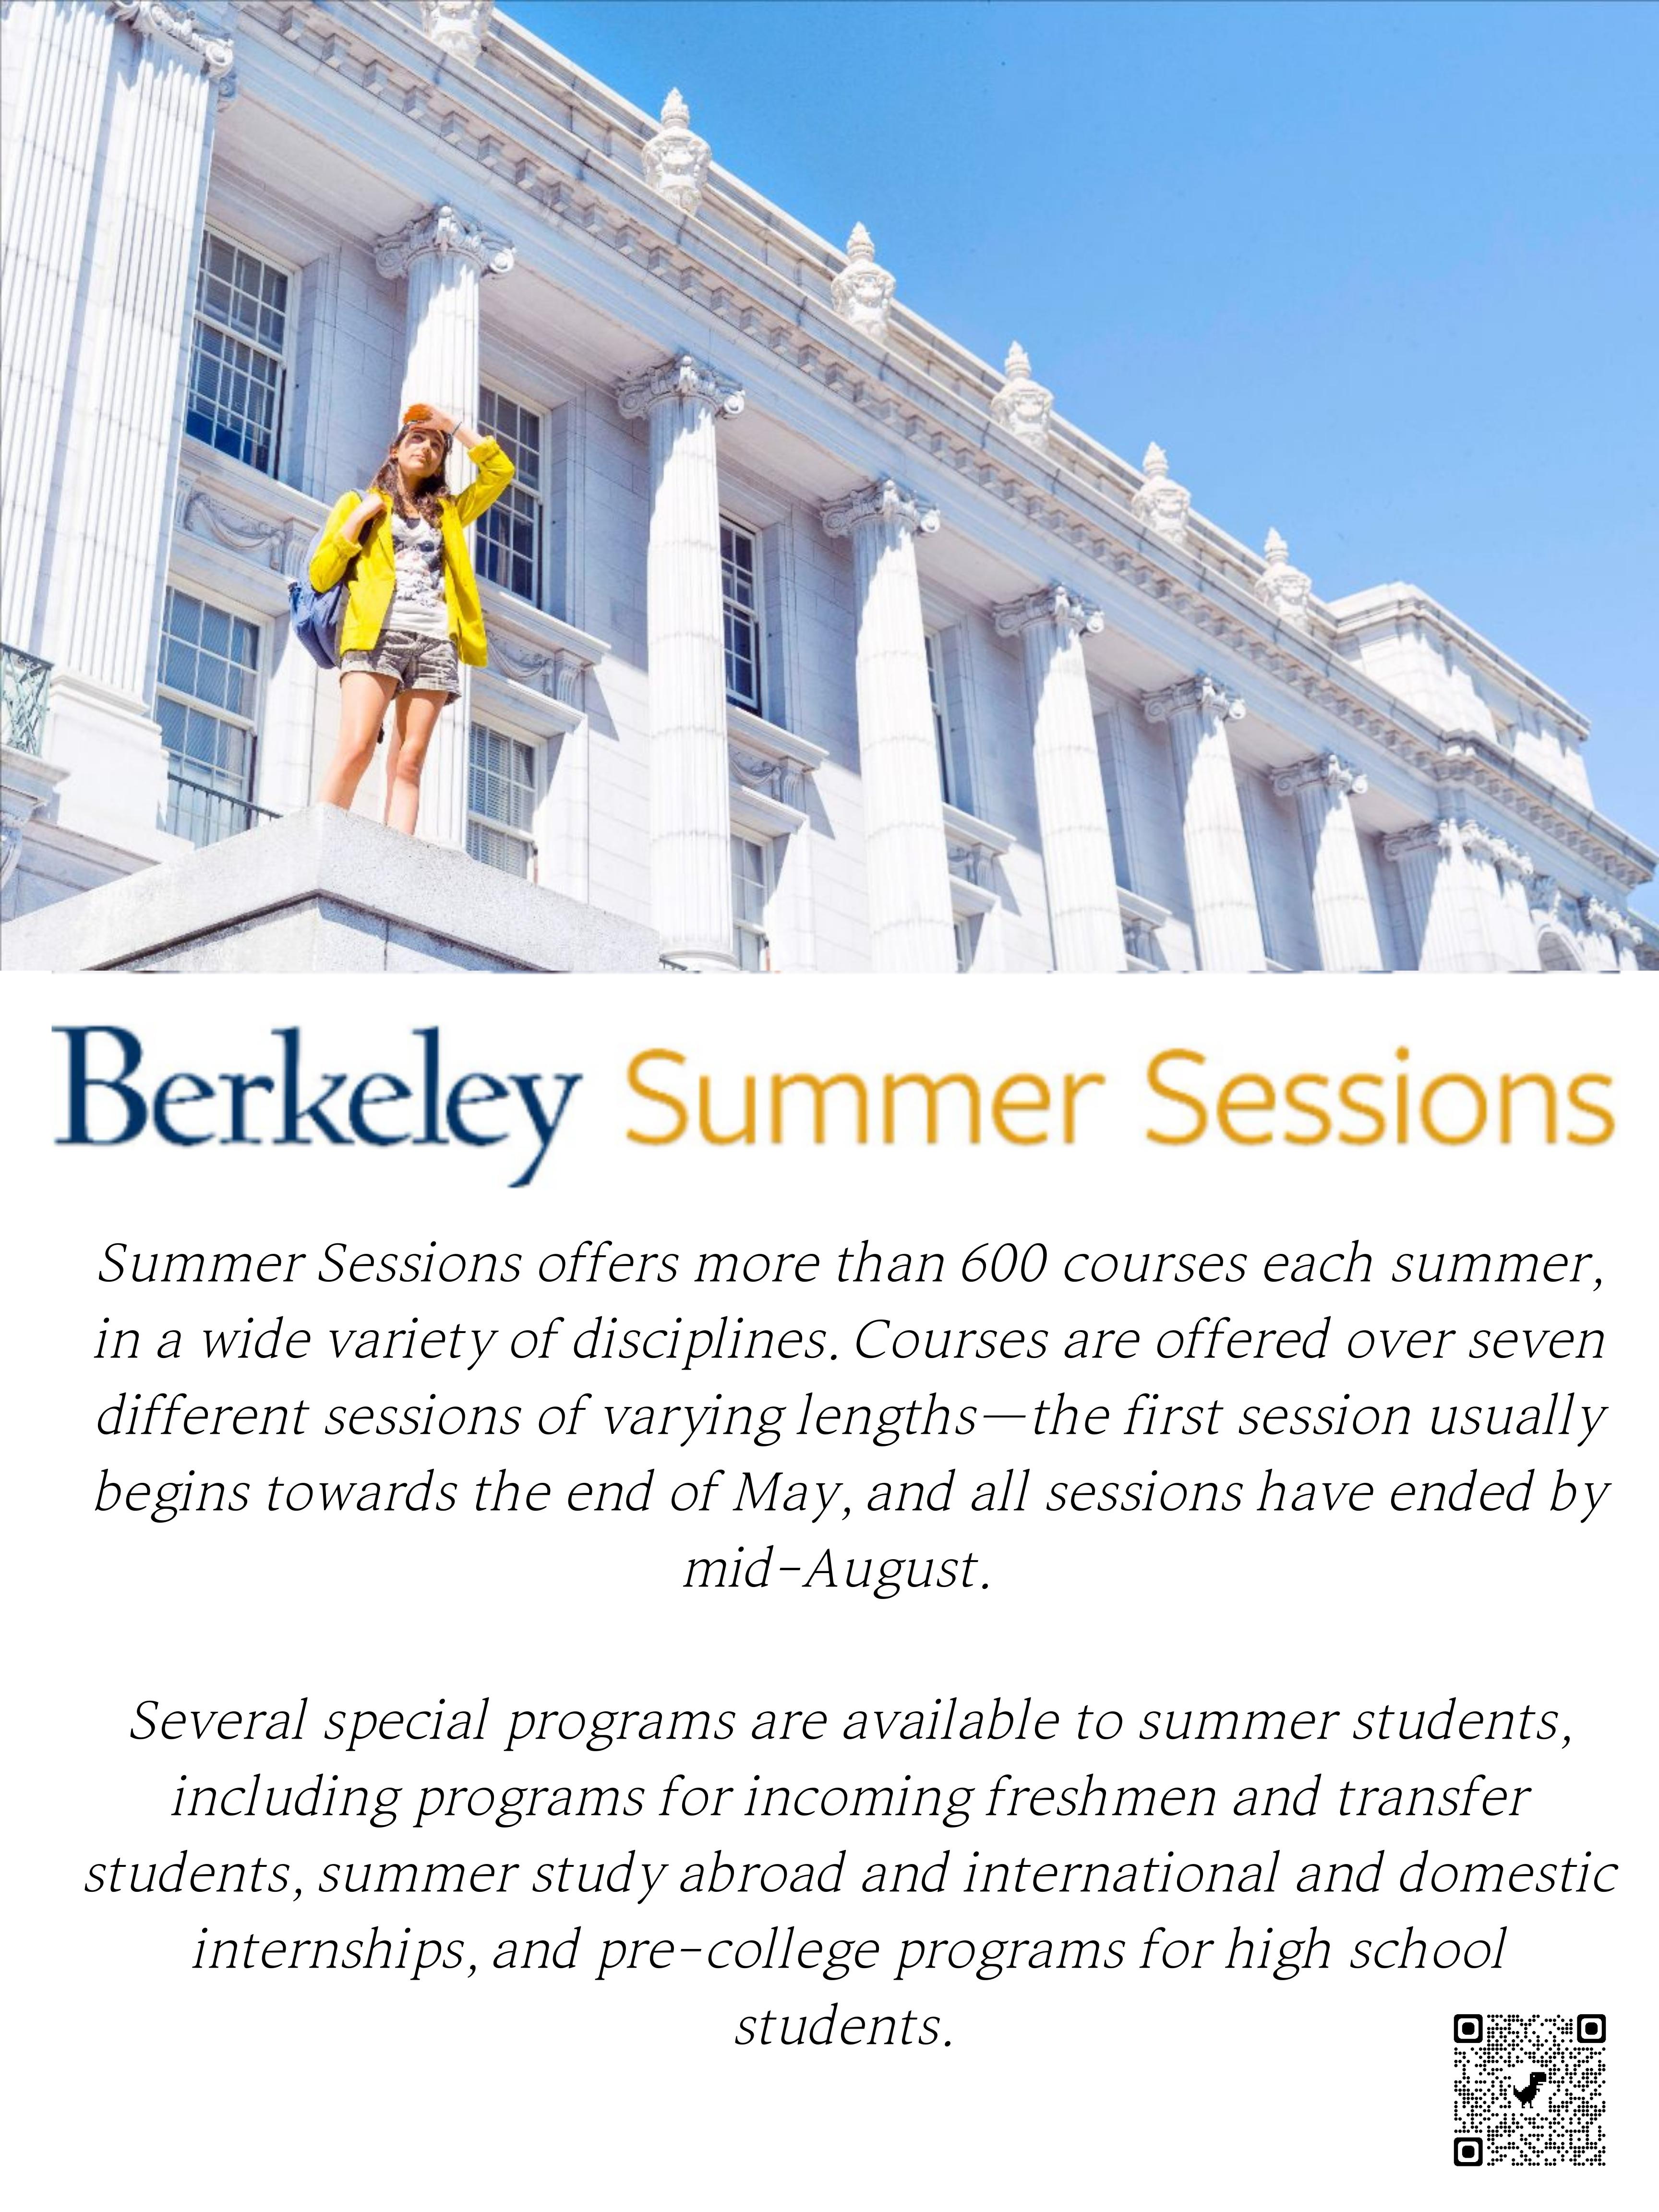 About Berkeley Summer Sessions